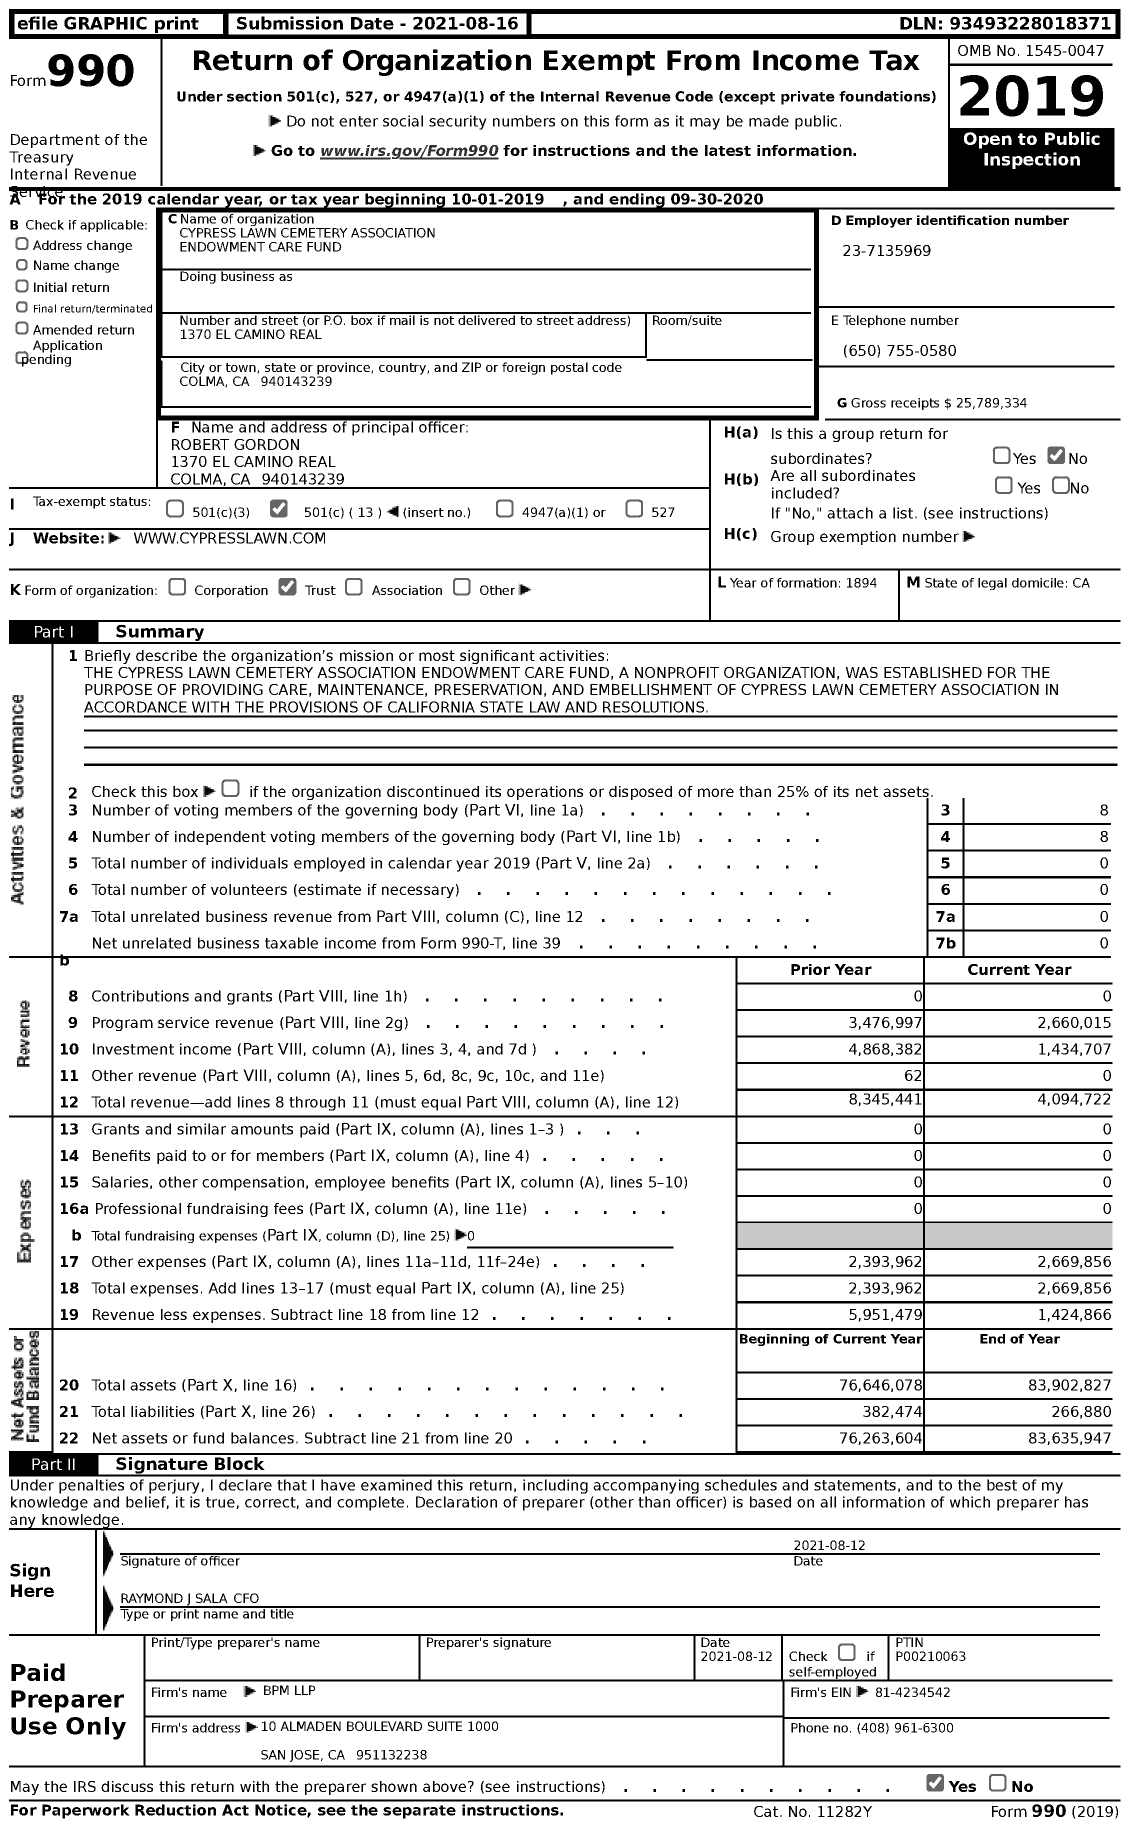 Image of first page of 2019 Form 990 for Cypress Lawn Cemetery Association Endowment Care Fund